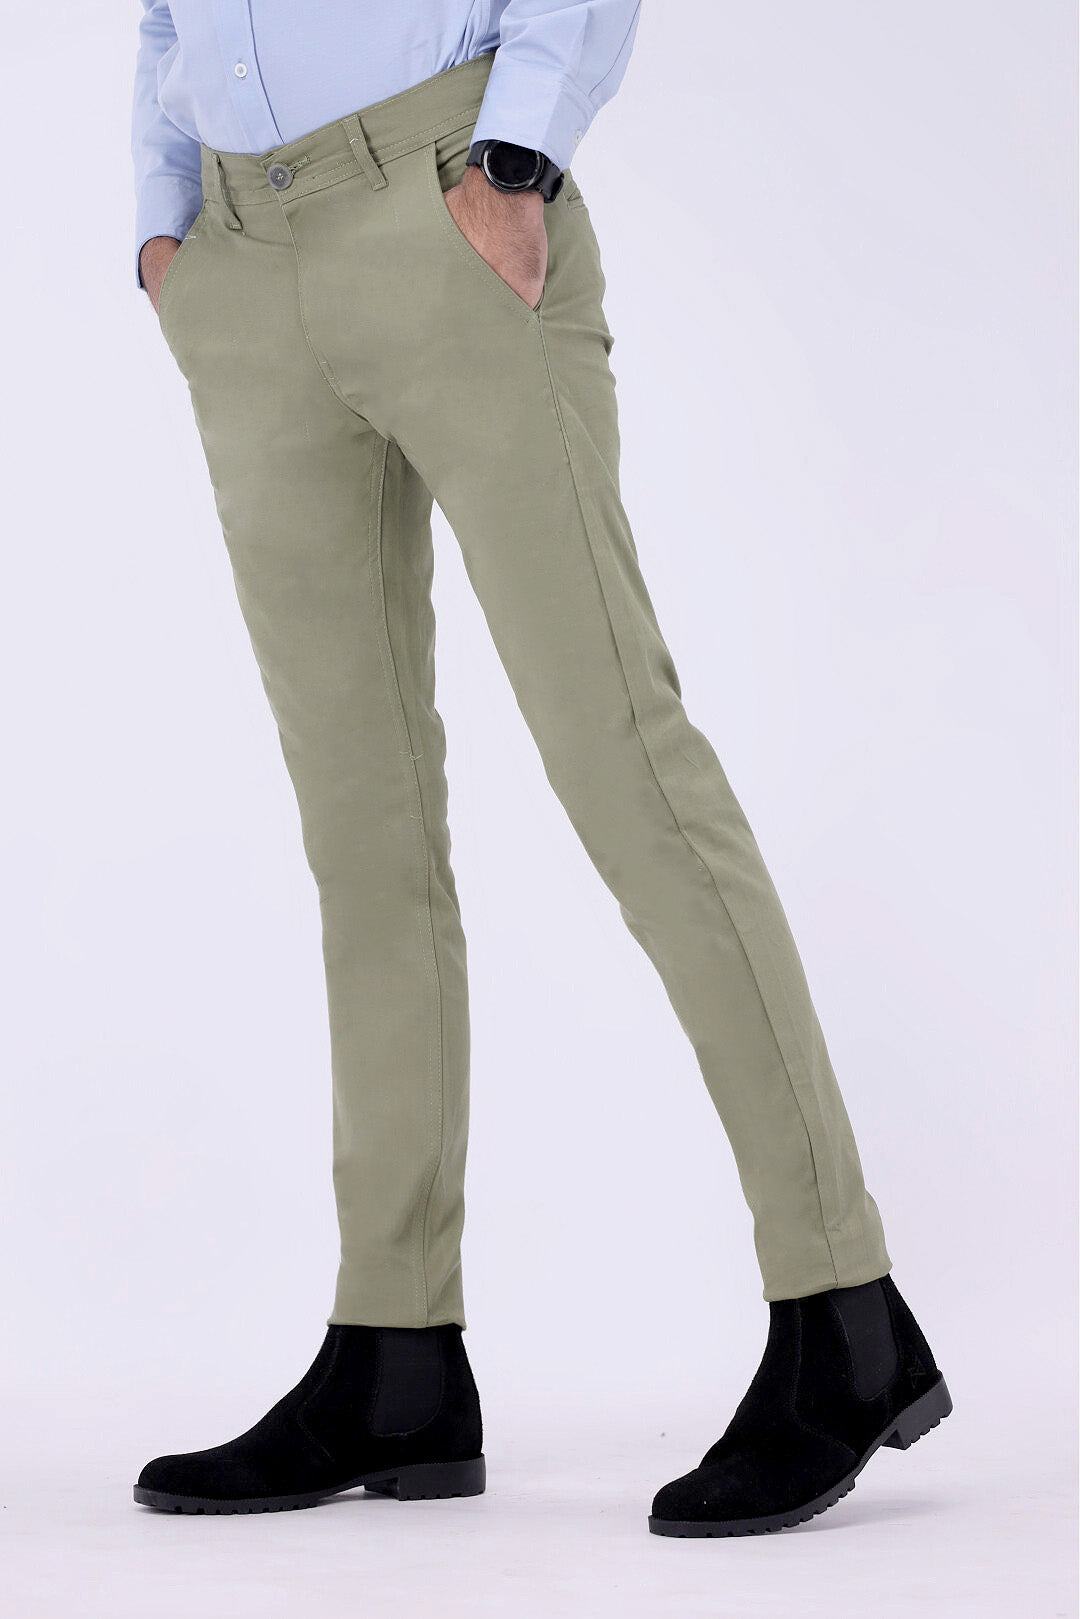 FT Cotton Chinos Pant - Olive Green